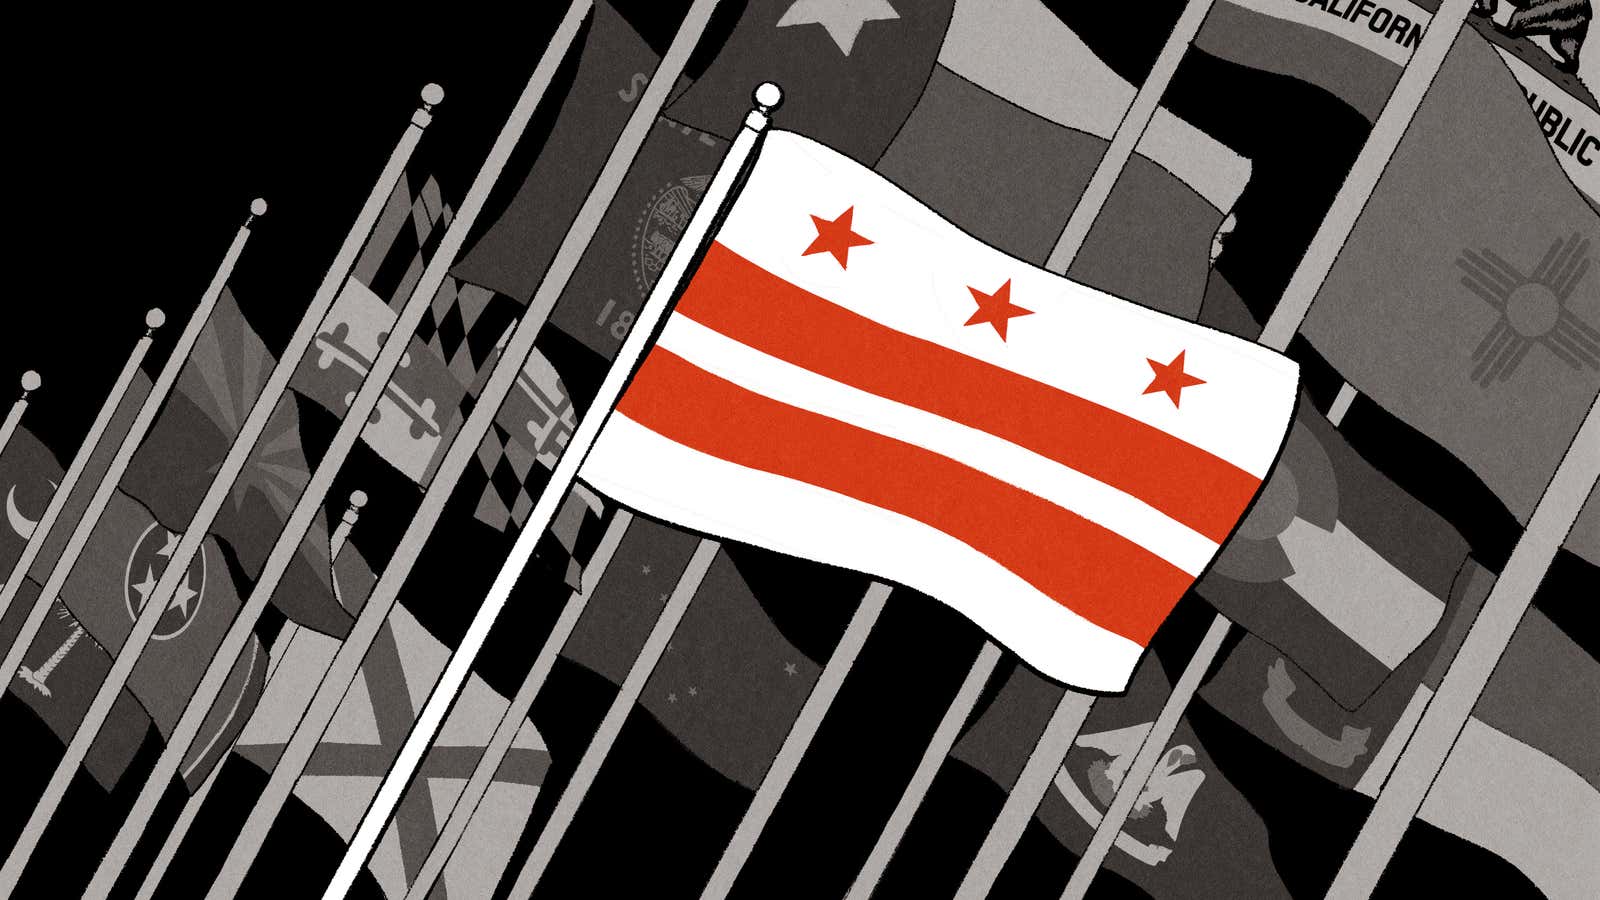 What Would Statehood for Washington, D.C. Mean?